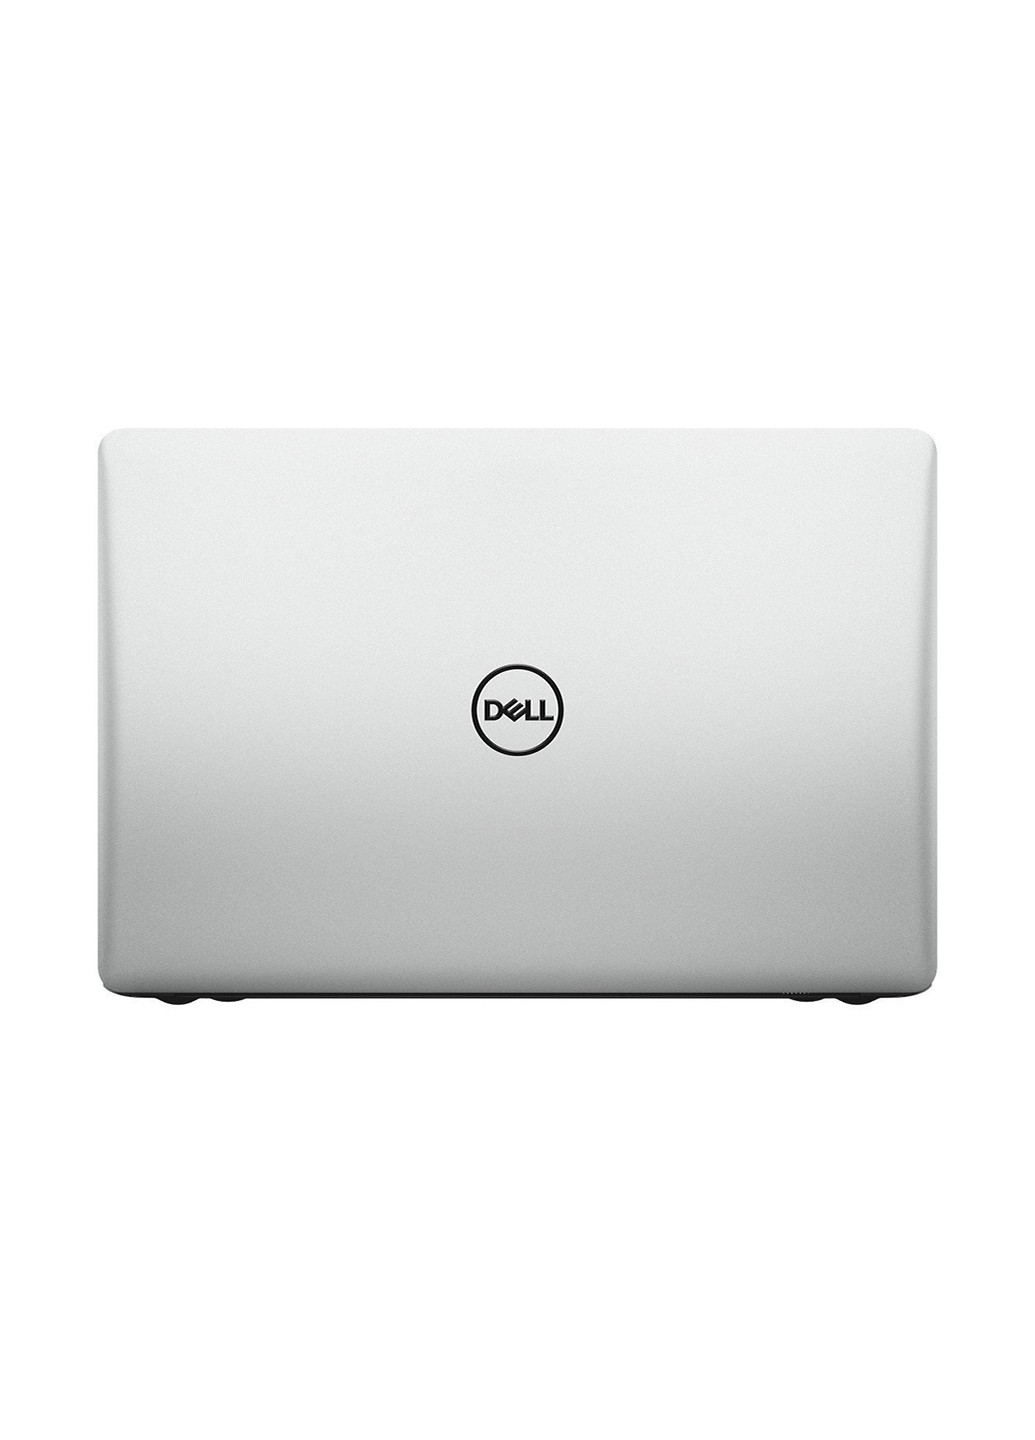 Ноутбук Dell inspiron 17 5770 (57i78s1h1r5m-wps) silver (137041929)